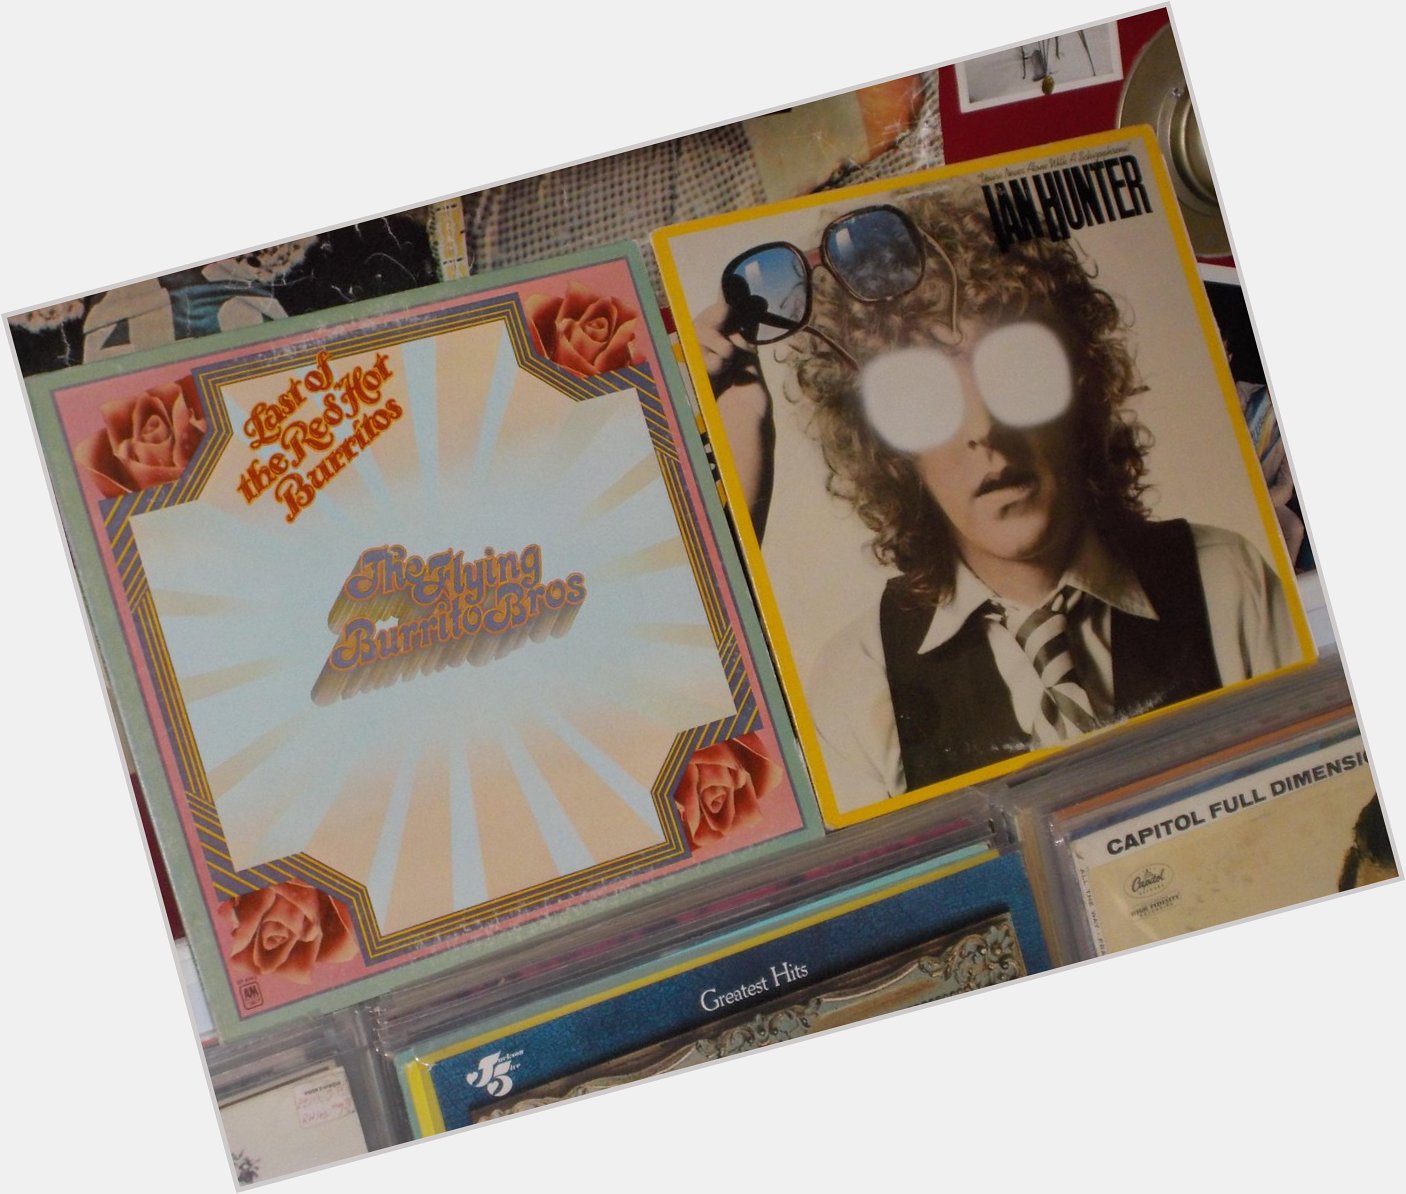 Happy Birthday to the late Michael Clarke of the Flying Burrito Brothers (and the Byrds) and Ian Hunter (of Mott) 